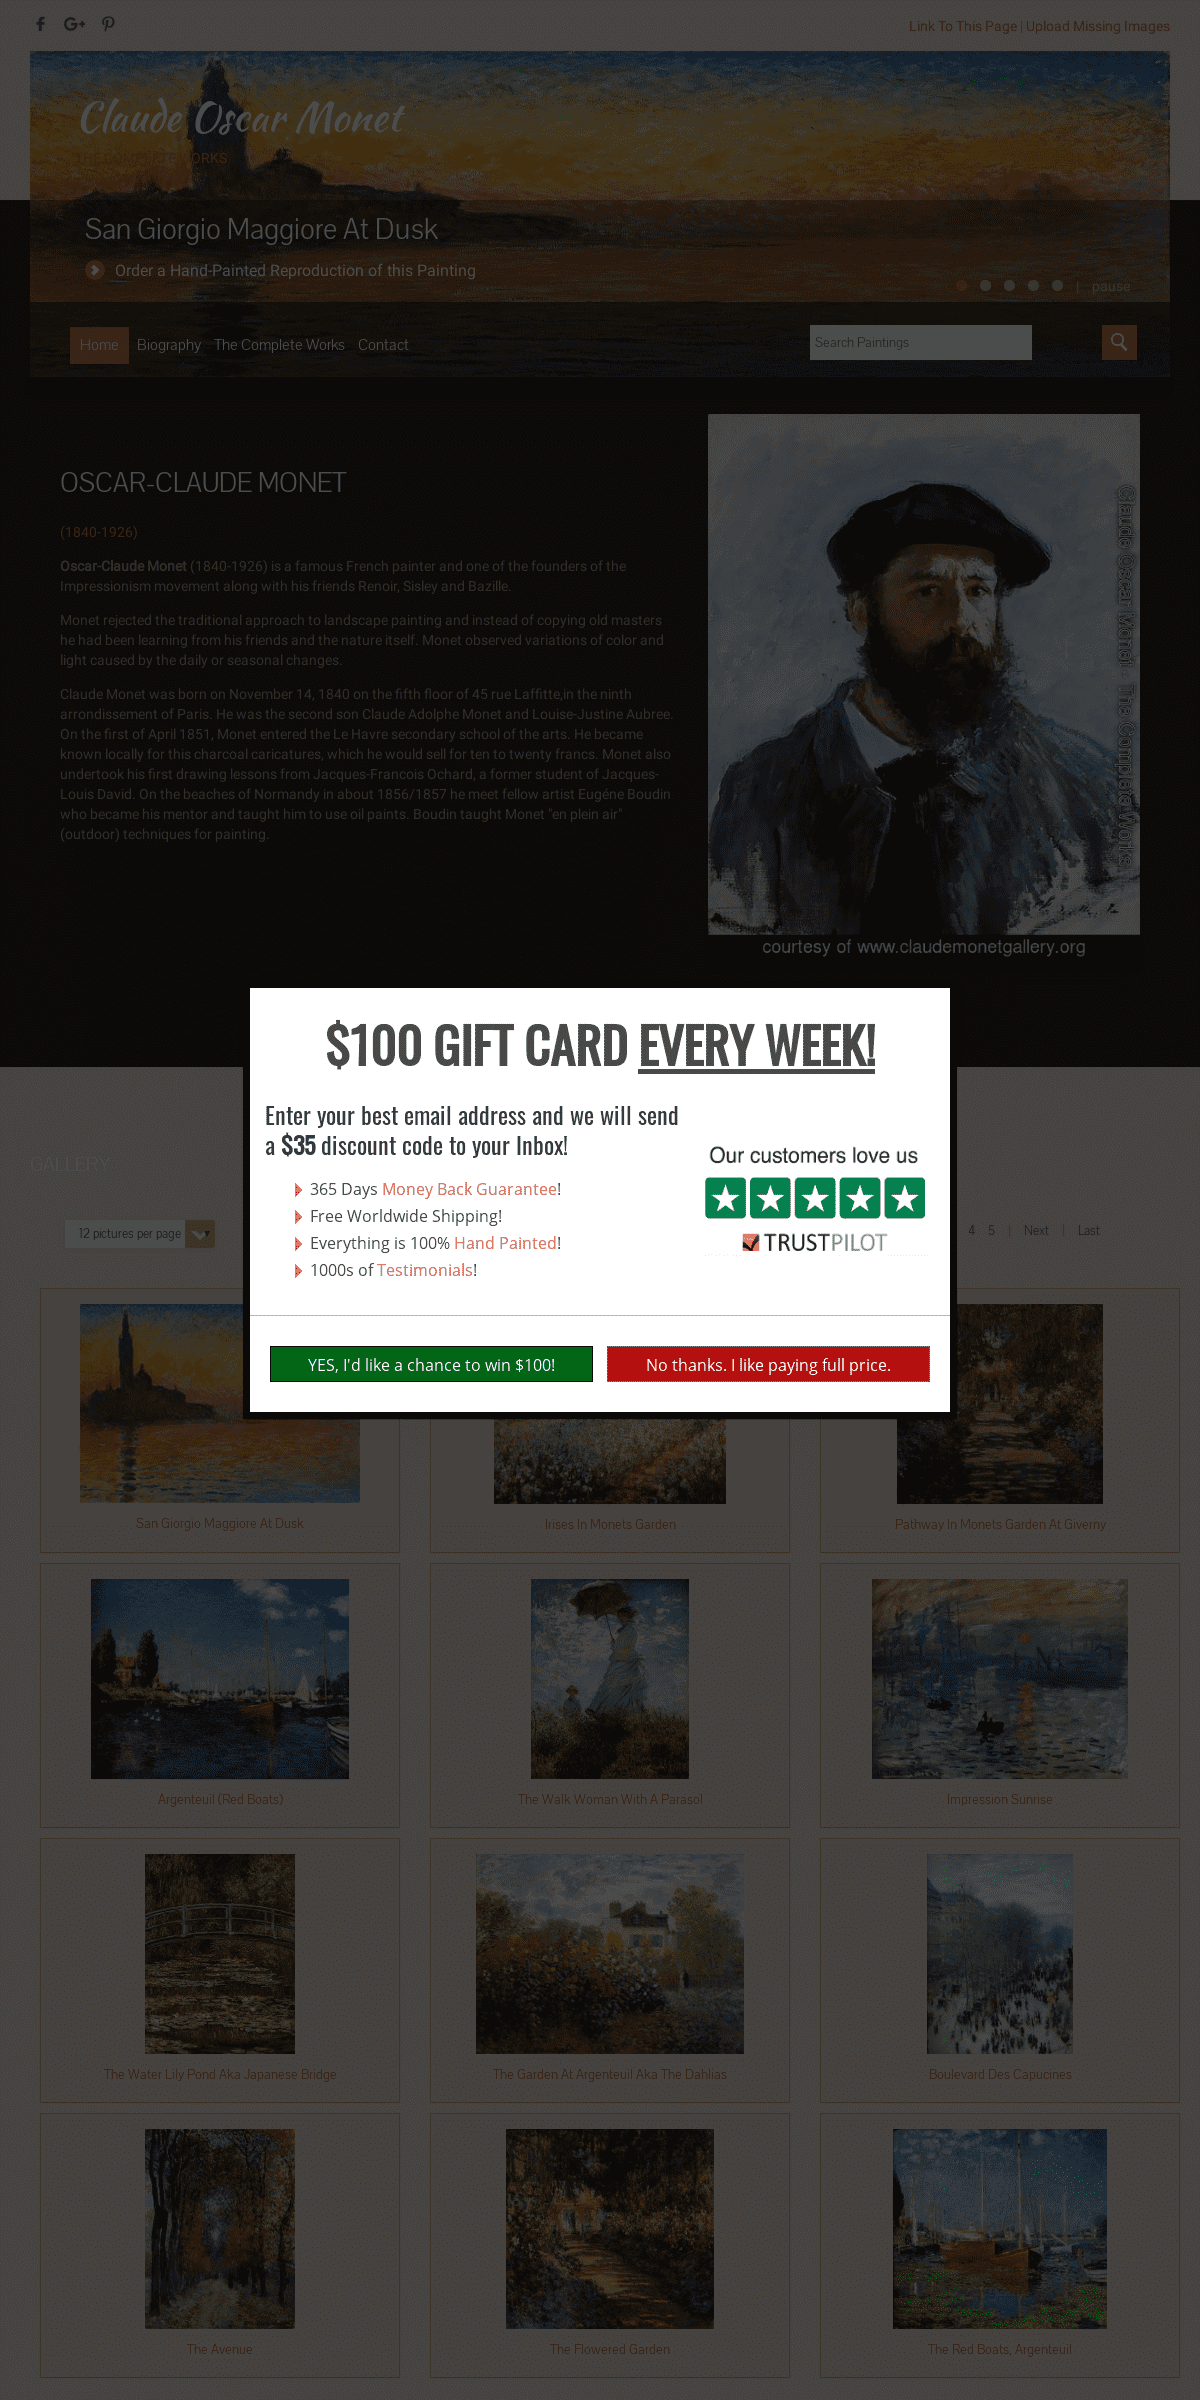 A complete backup of claudemonetgallery.org